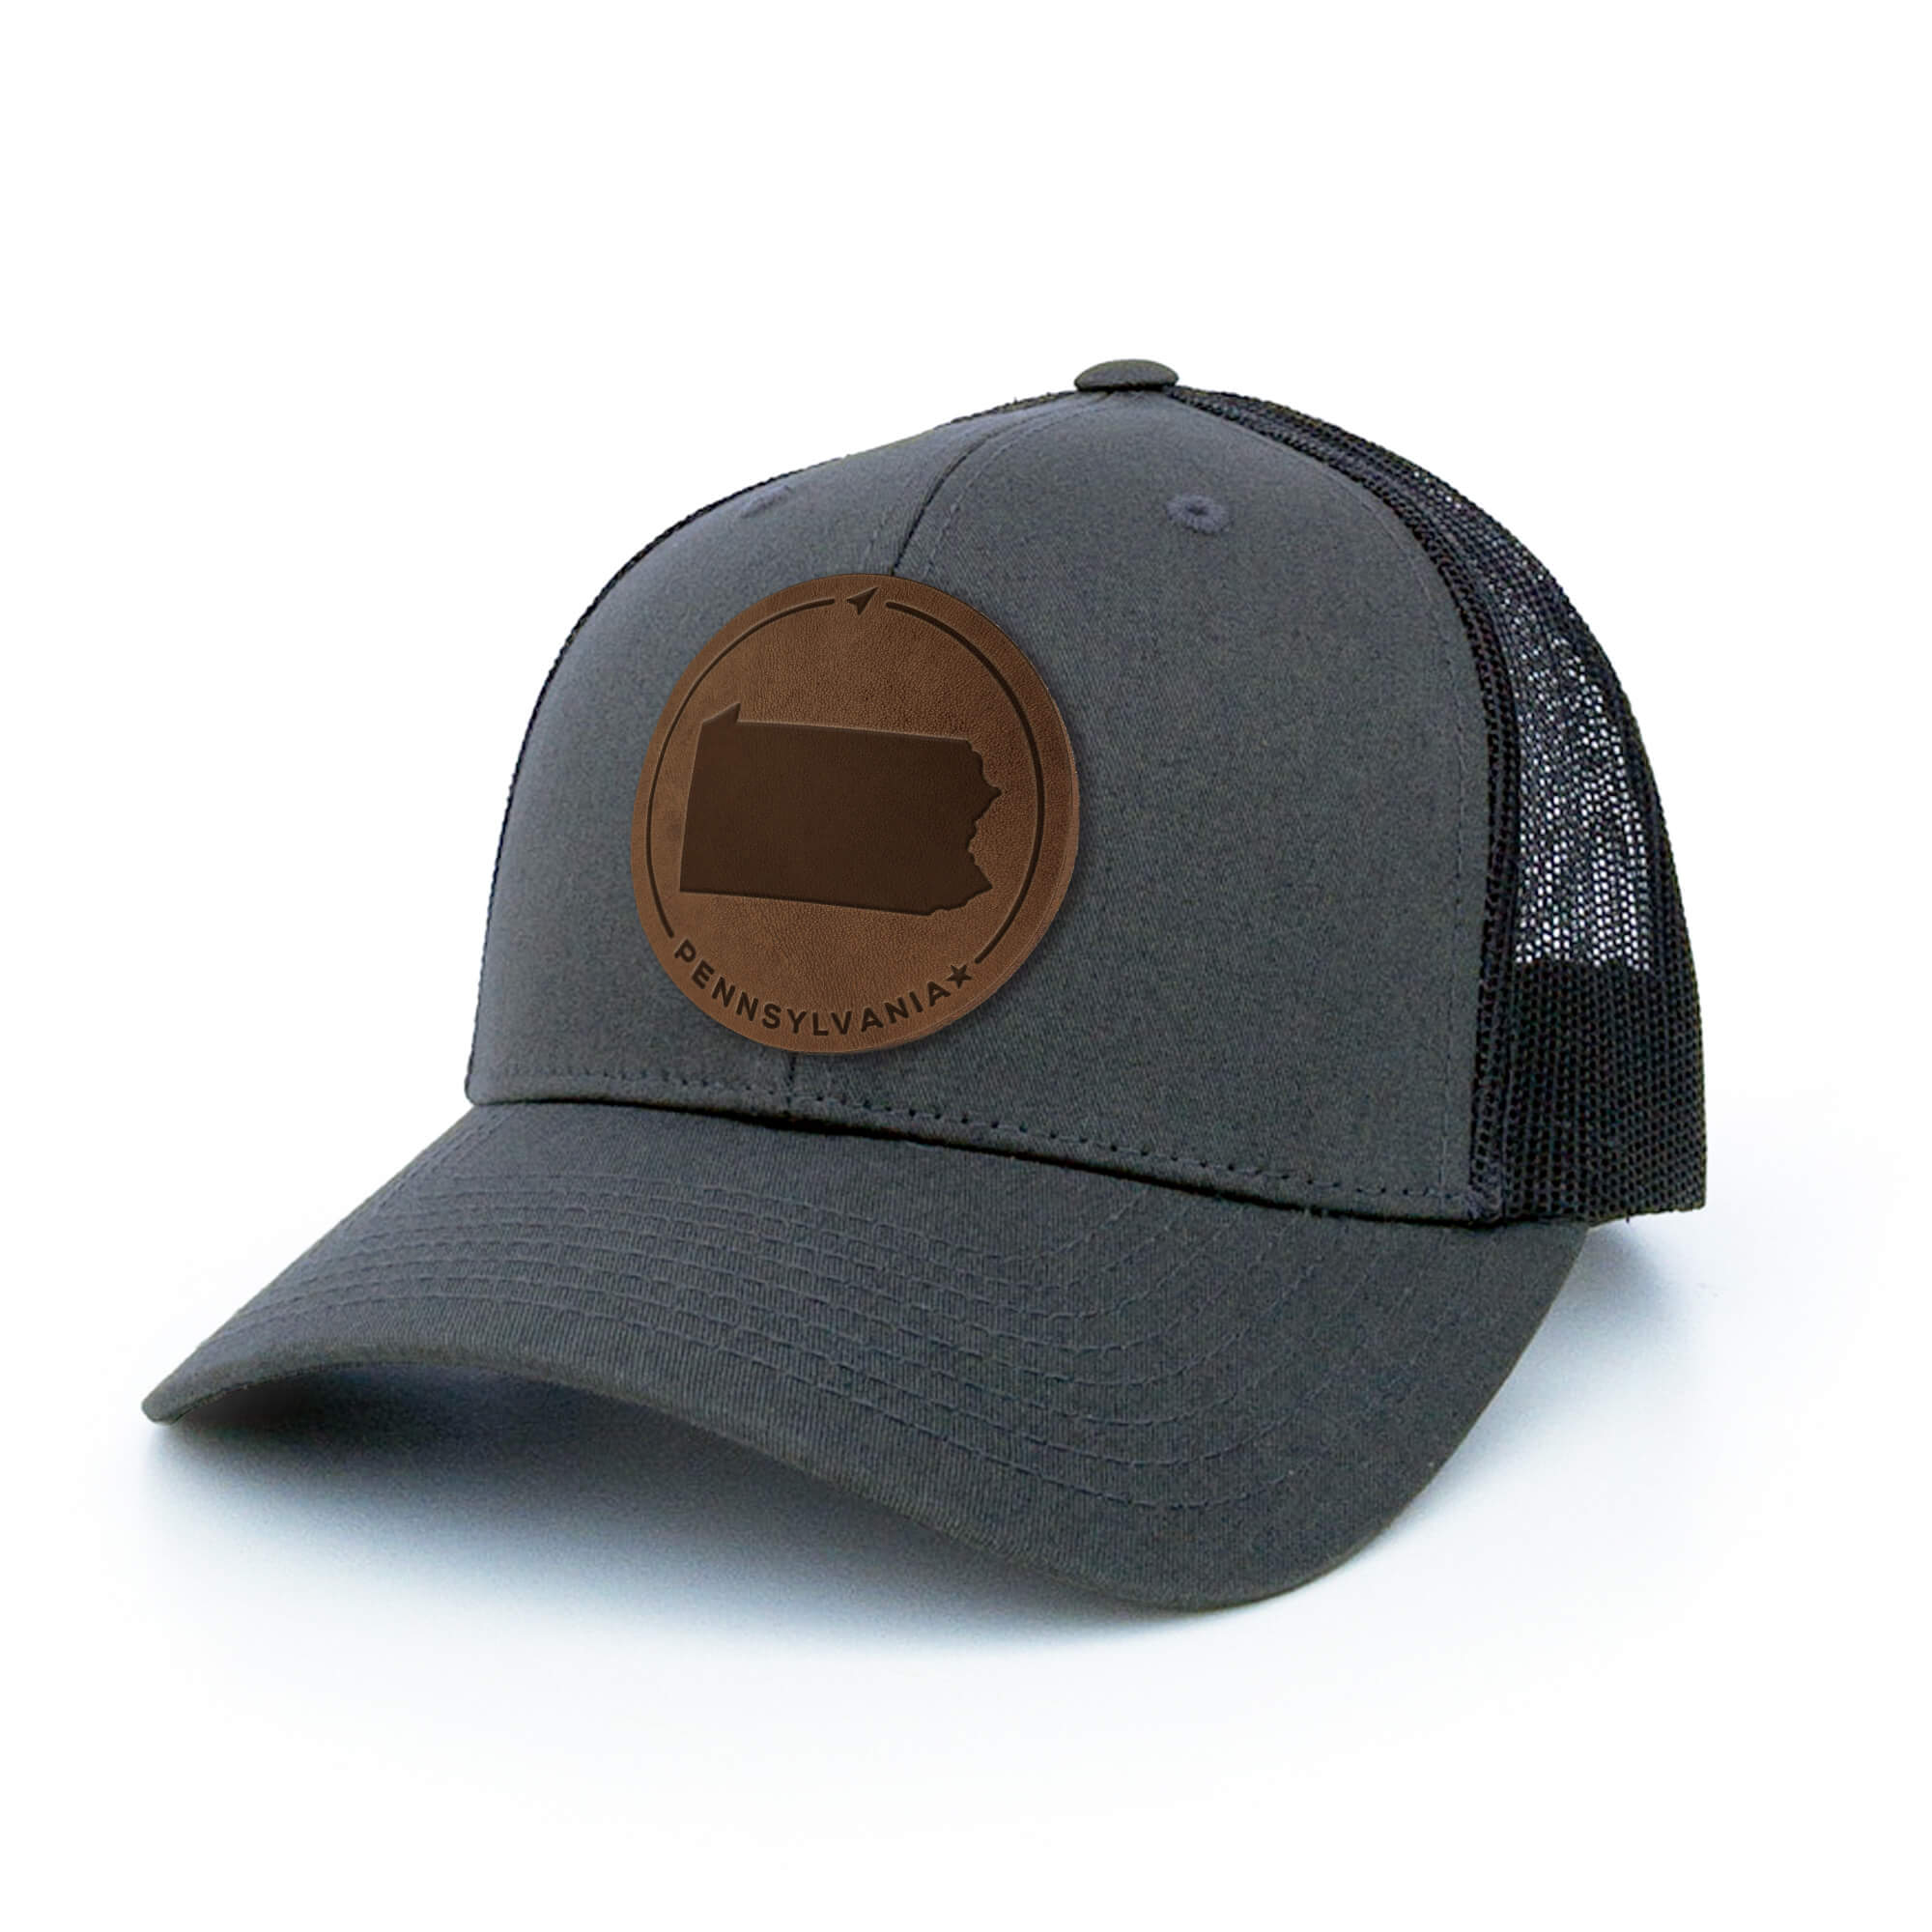 Charcoal trucker hat with full-grain leather patch of Pennsylvania | BLACK-003-003, CHARC-003-003, NAVY-003-003, HGREY-003-003, MOSS-003-003, BROWN-003-003